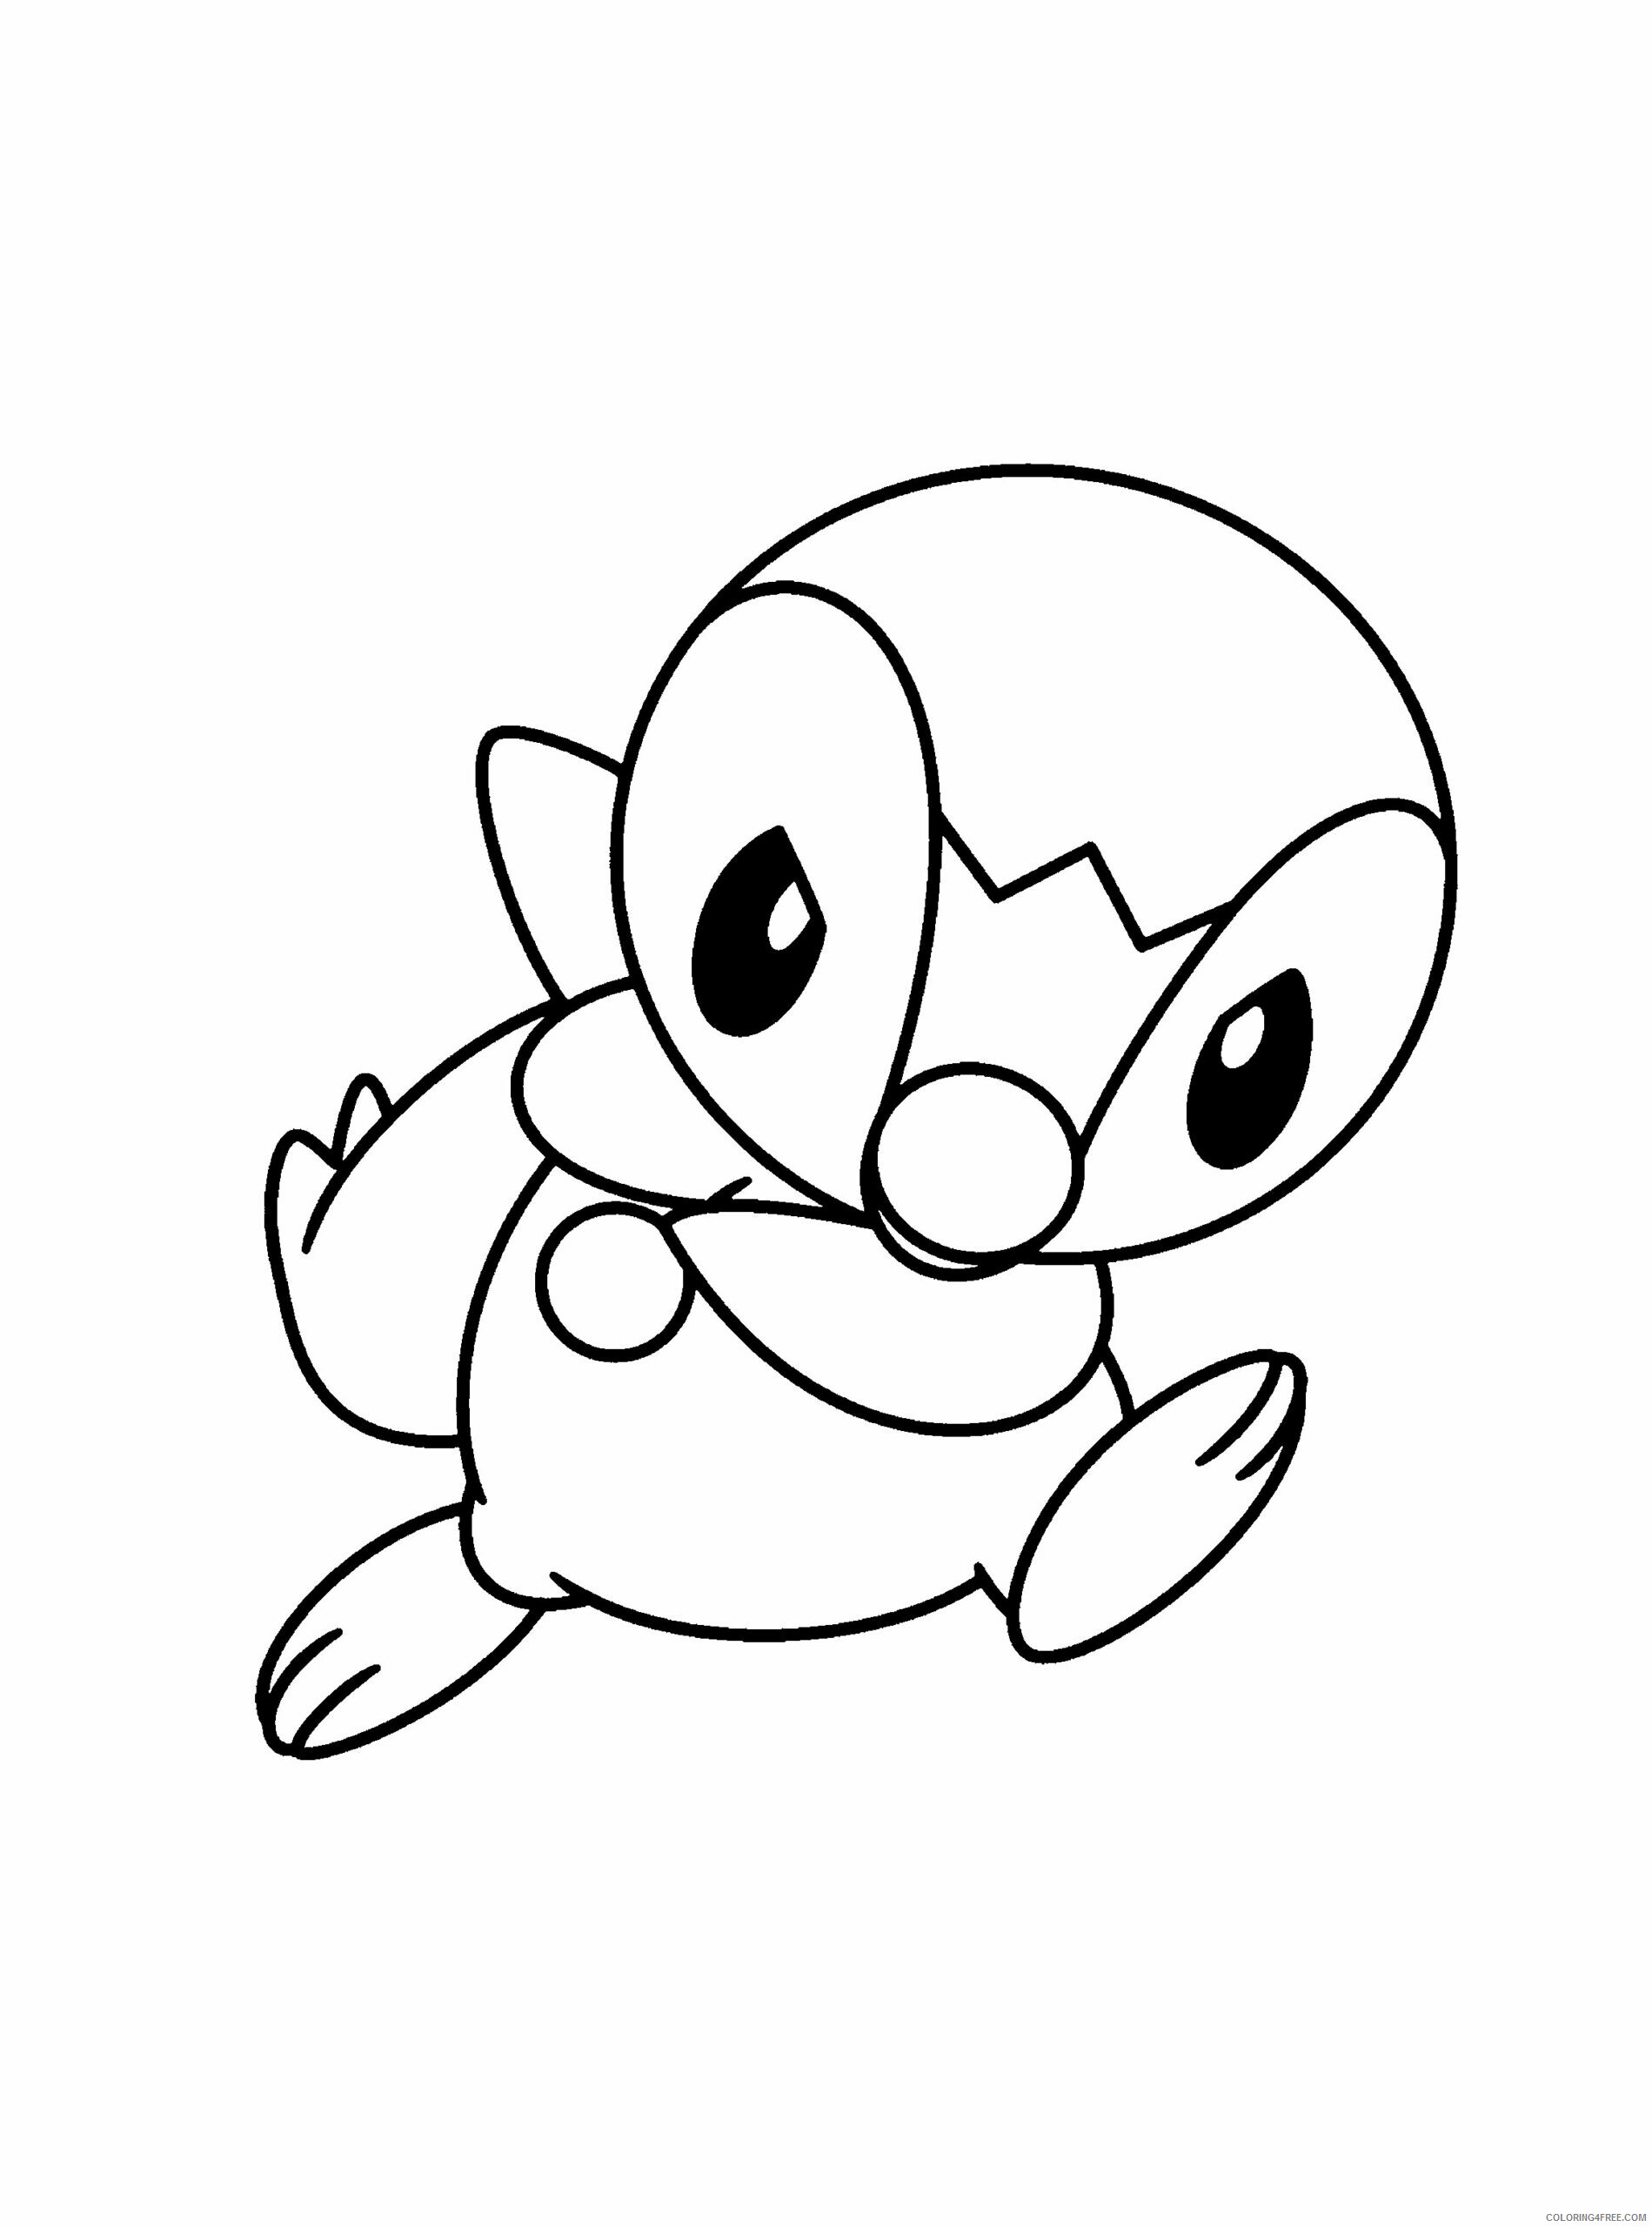 Pokemon Diamond Pearl Coloring Pages Anime pokemon diamond pearl 269 Printable 2021 765 Coloring4free